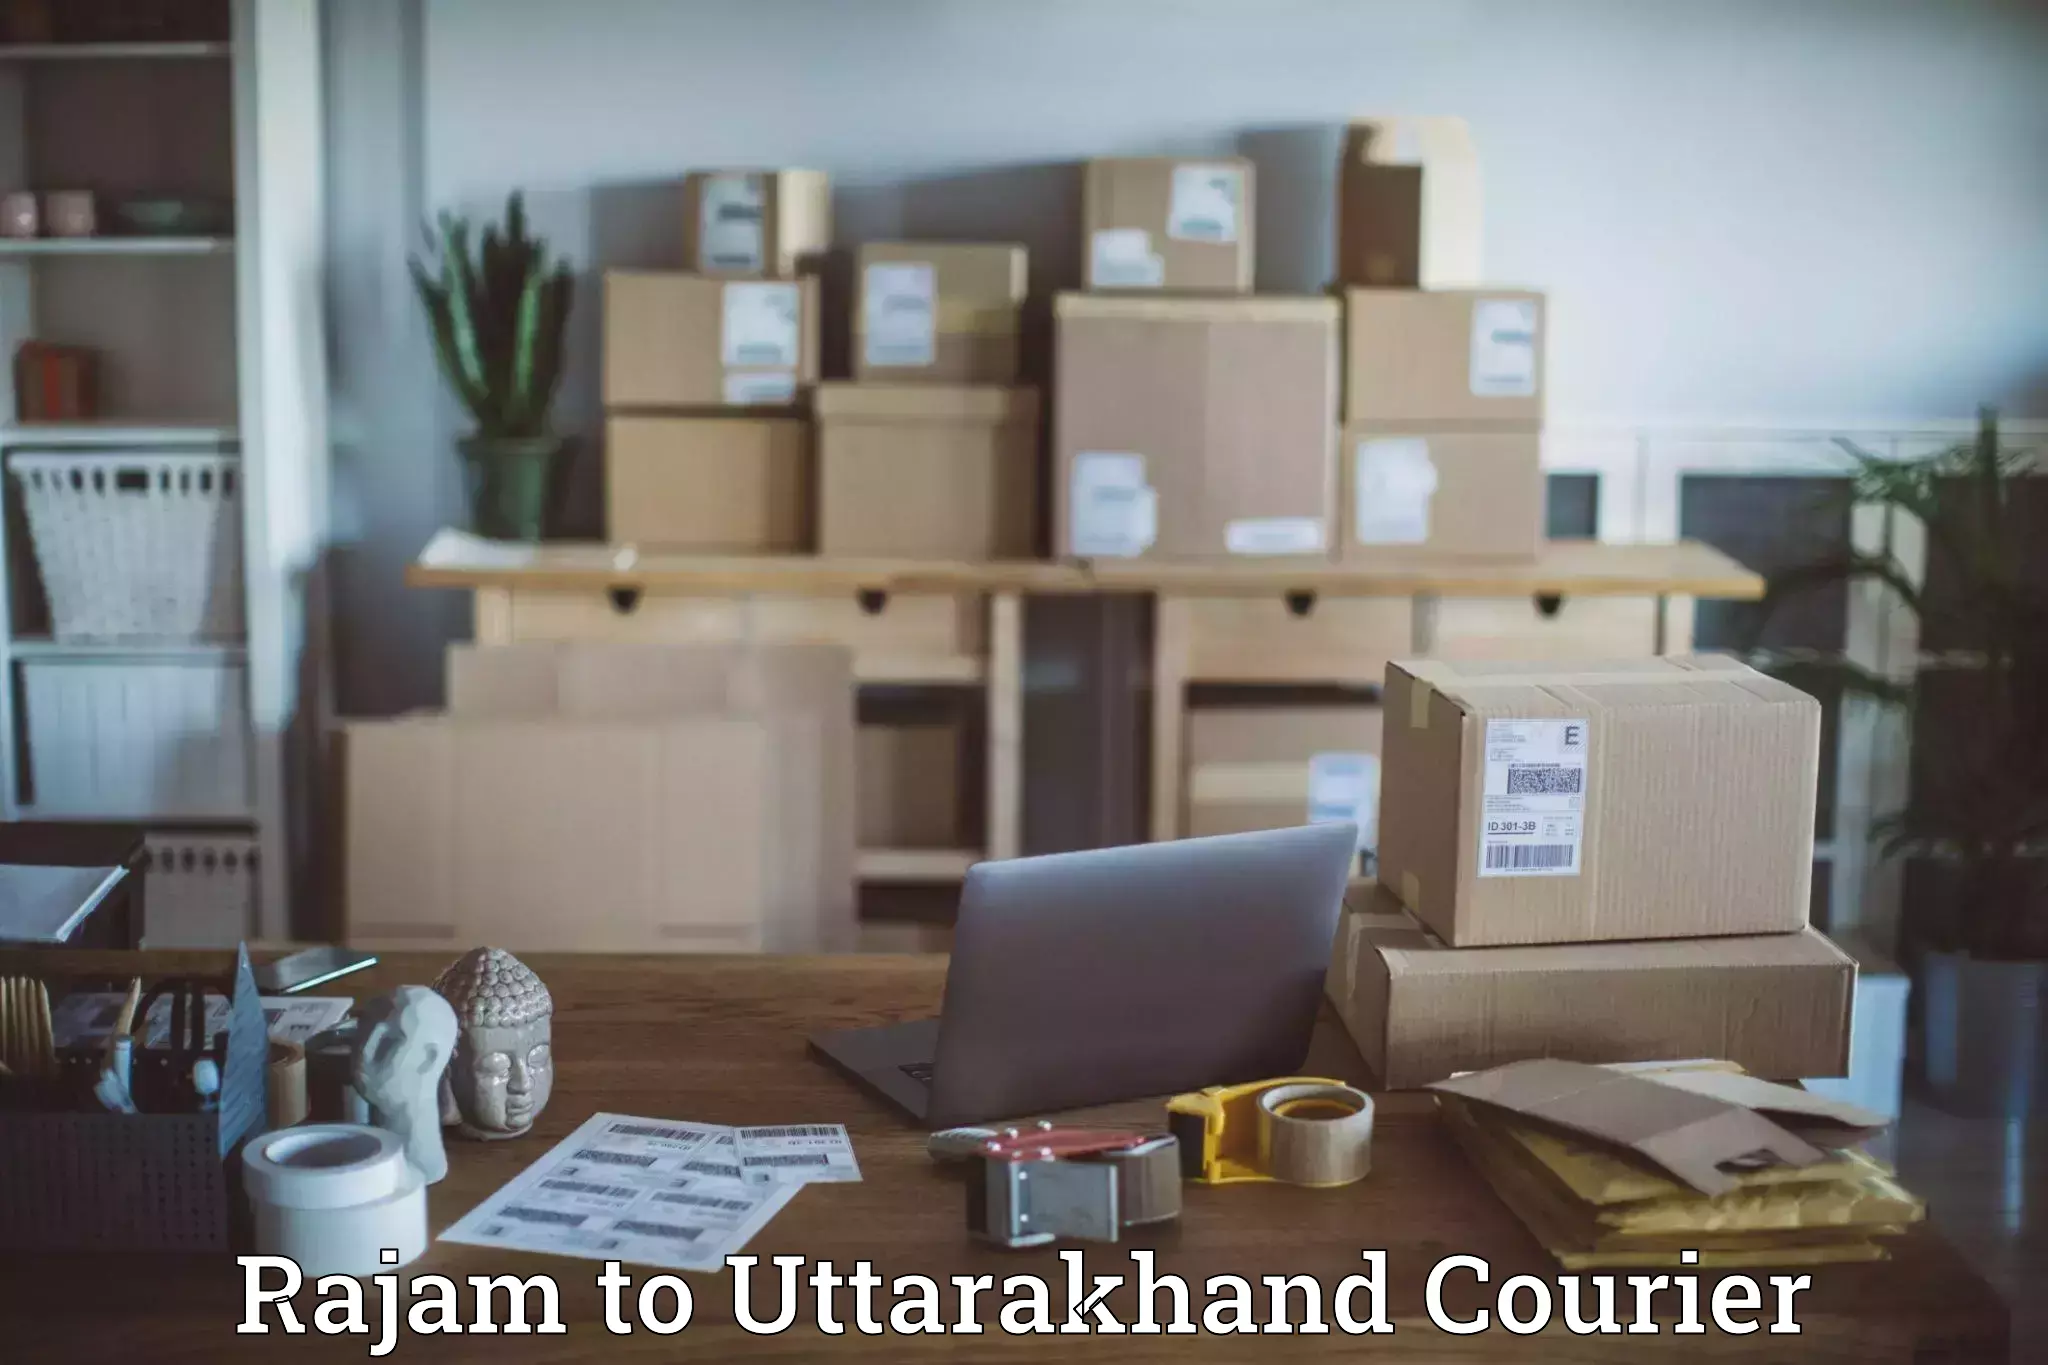 Multi-national courier services Rajam to Lansdowne